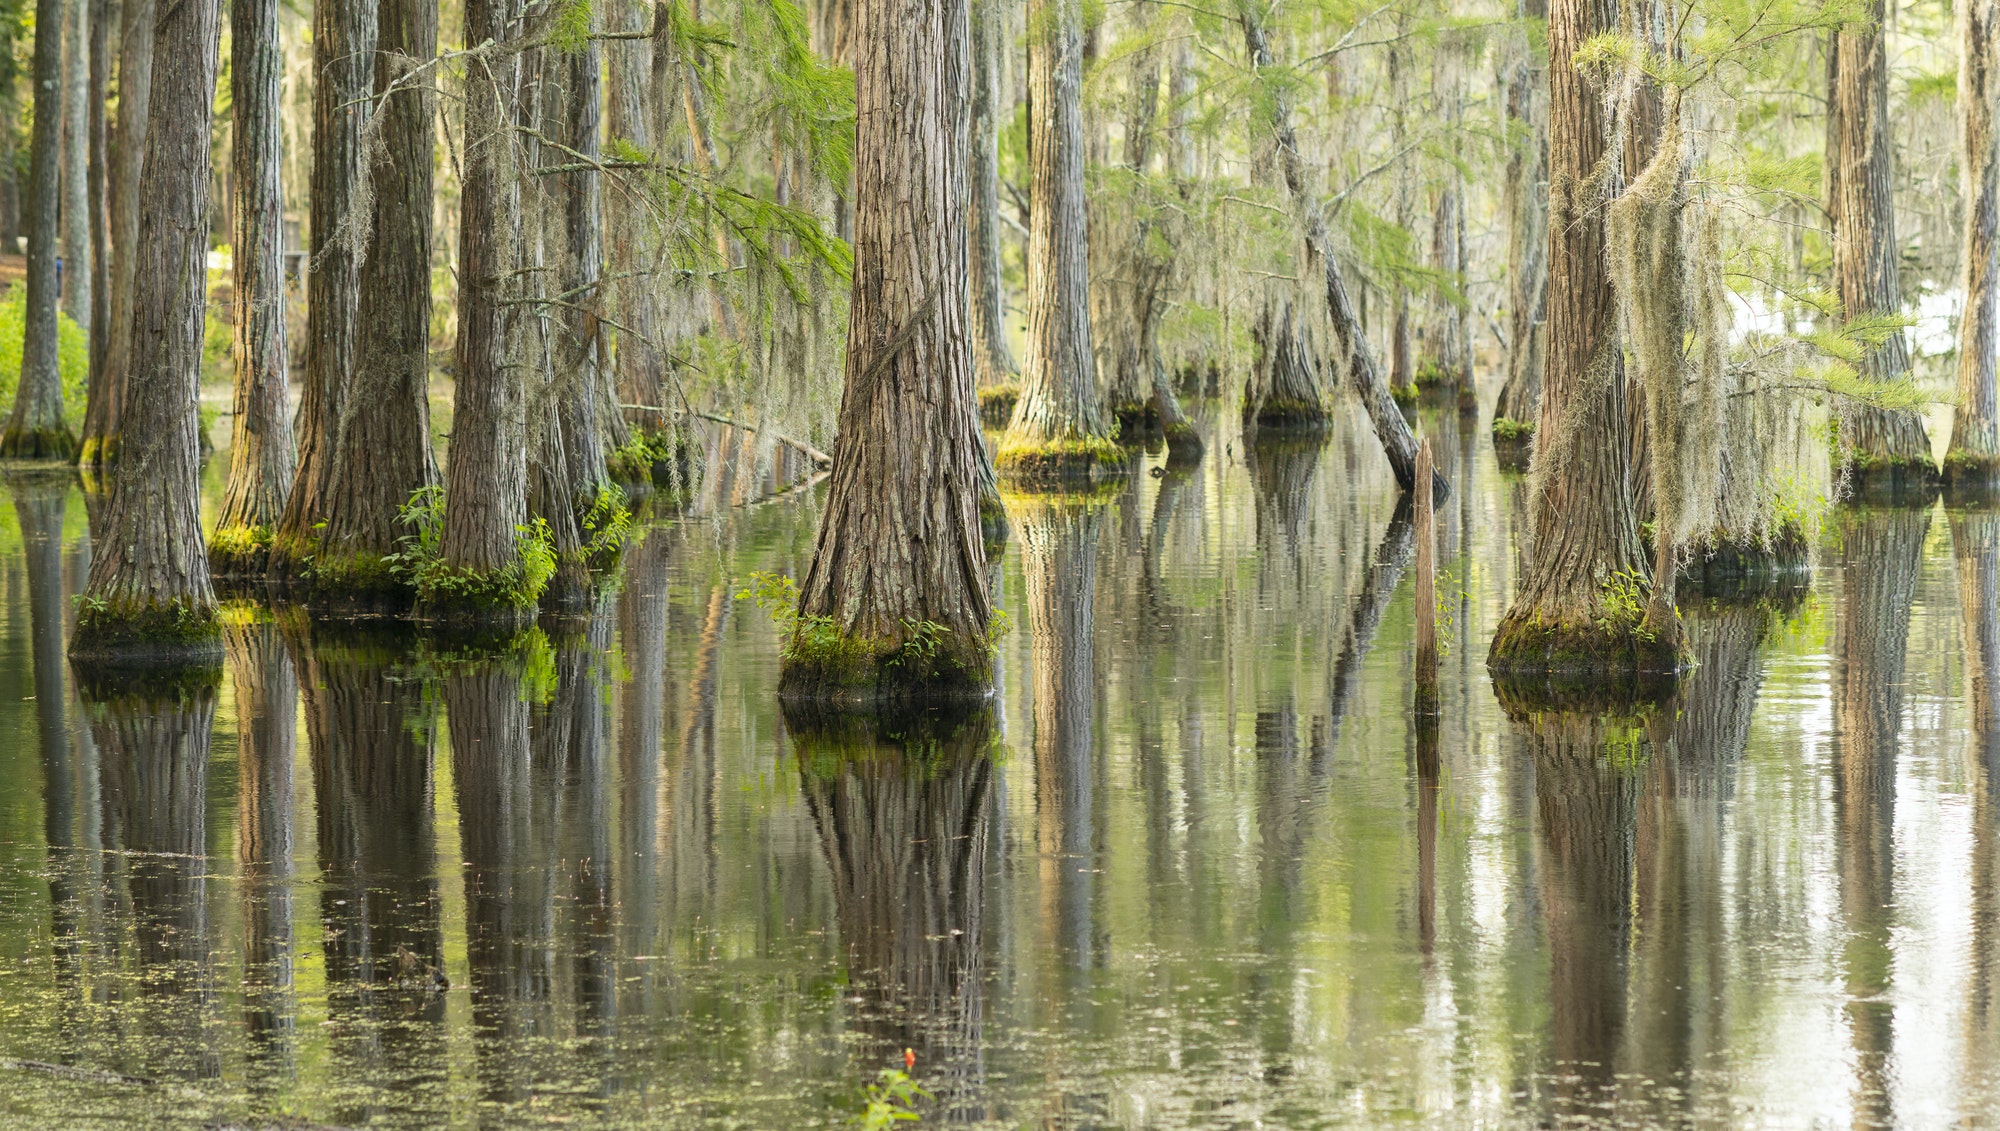 Smooth Water Reflects Cypress Trees in Swamp Marsh Lake